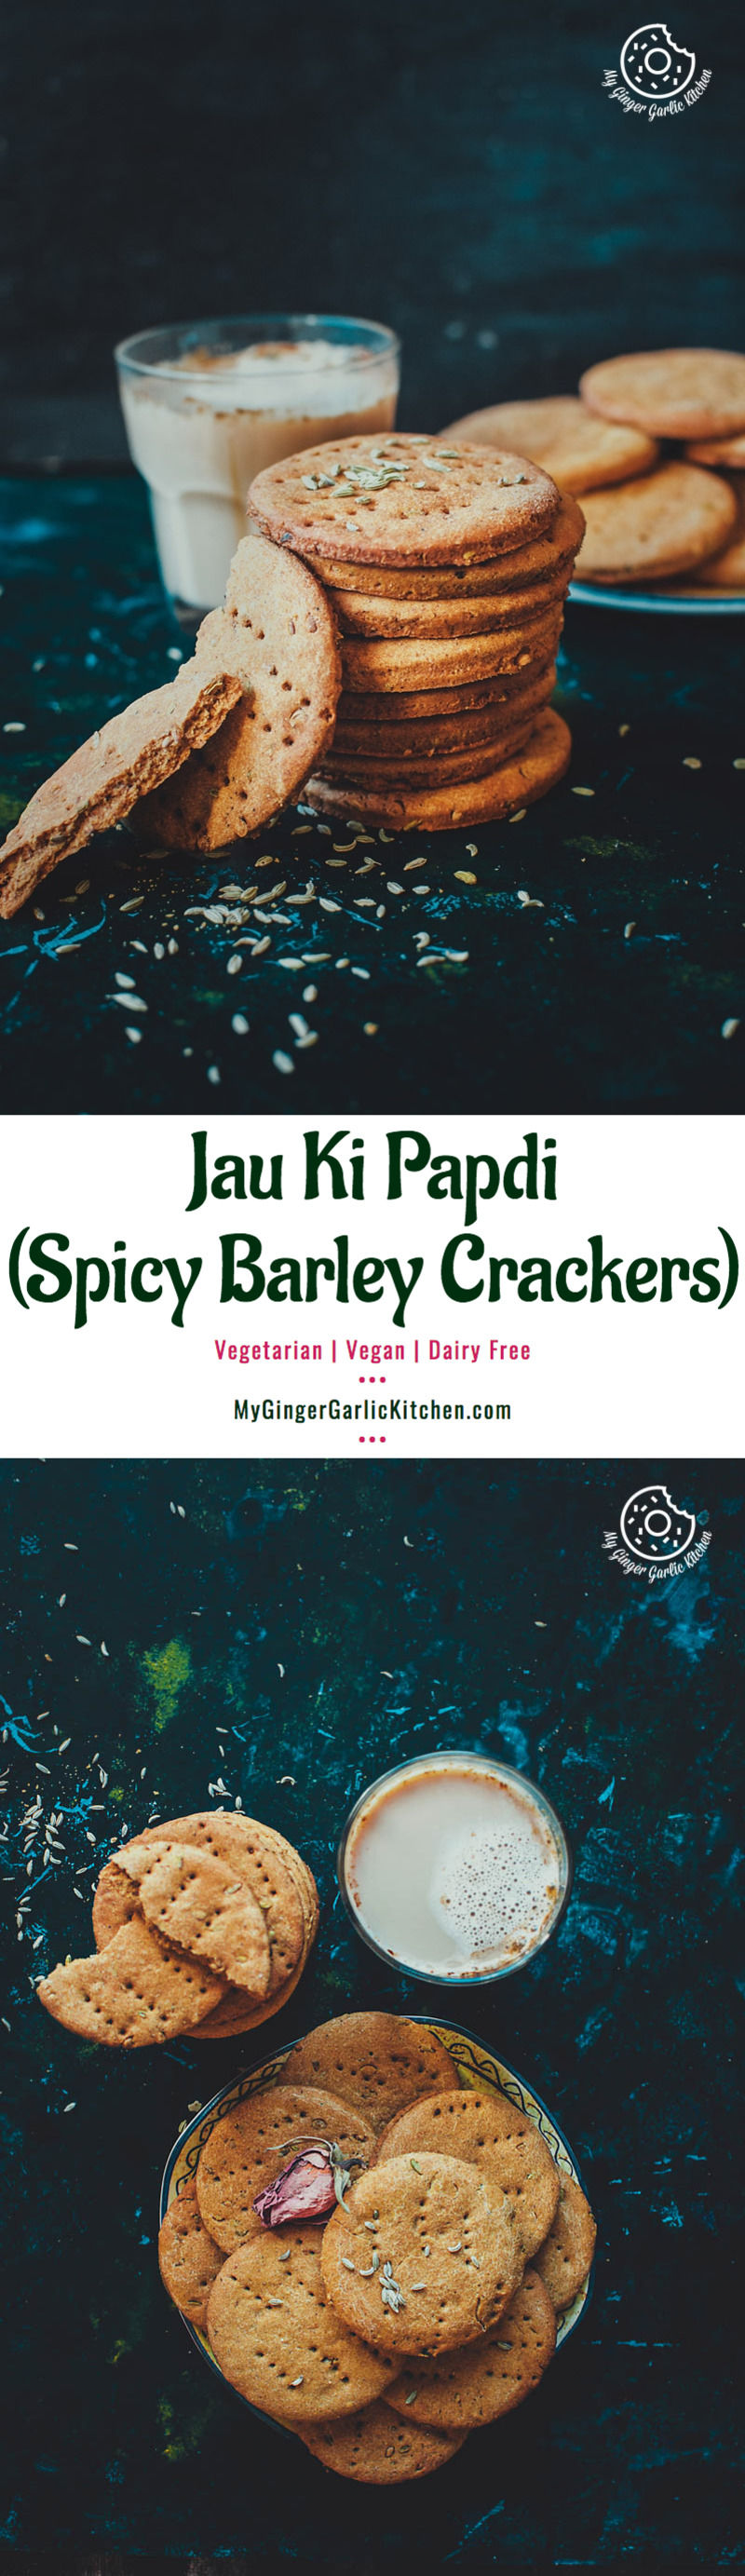 a picture collage of a plate of a plate of jau ki papdi aka spicy barley crackers and a glass of coffee